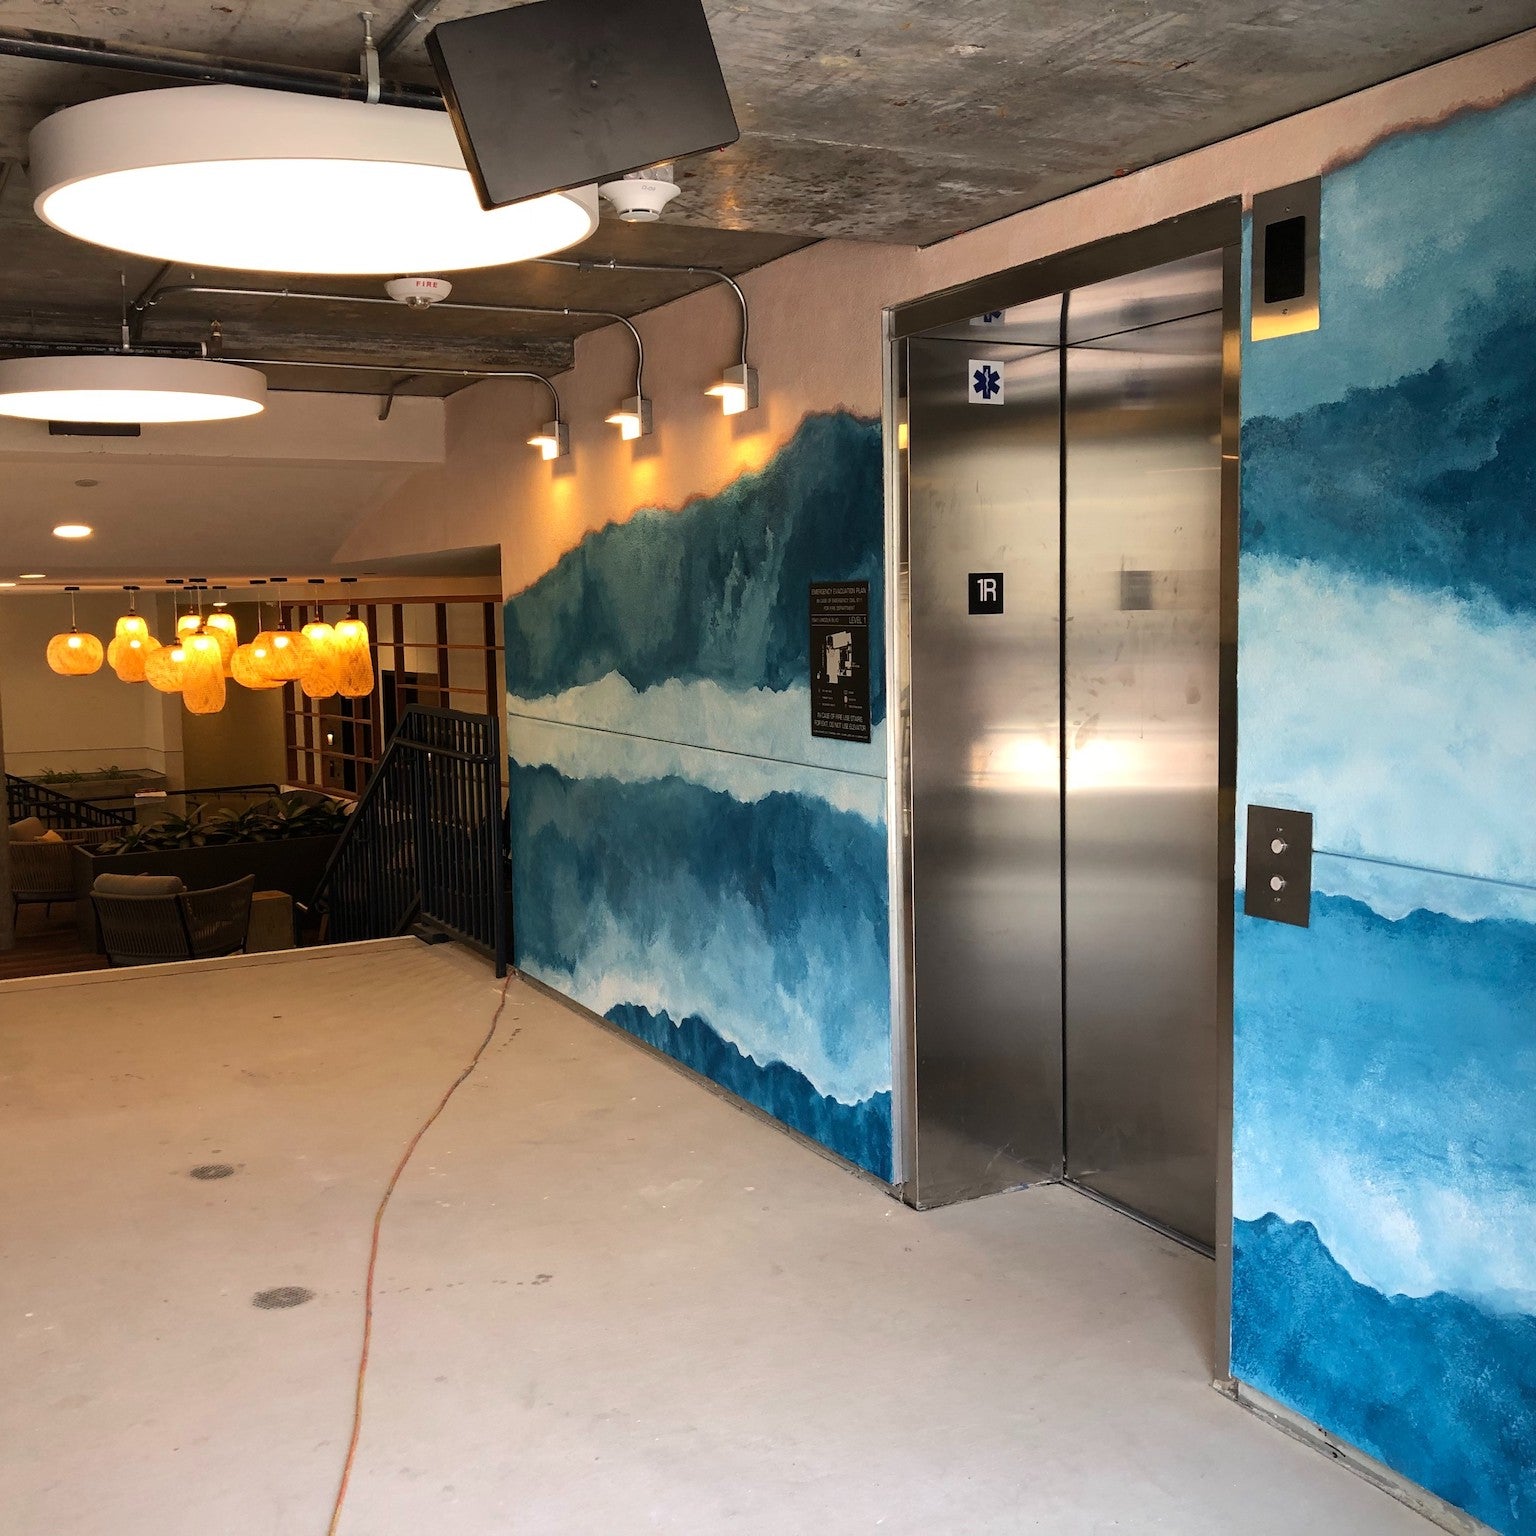 Elevator lobby at 1641 Lincoln with WRAPPED Studio's hand-painted mural, blending oceanic blues to guide and intrigue tenants with its watercolor effects.